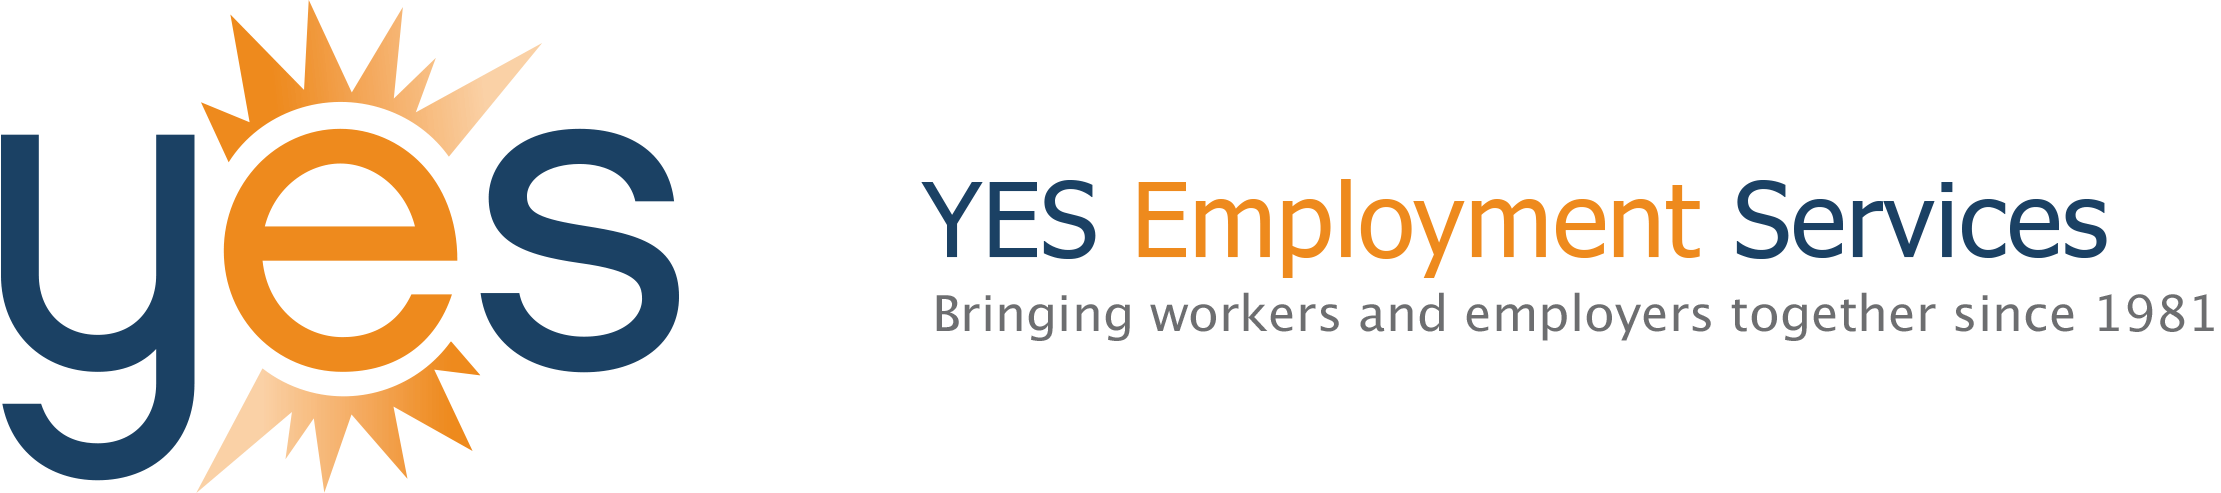 Employment Service Logo - YES Employment Services - Bringing workers and employers together